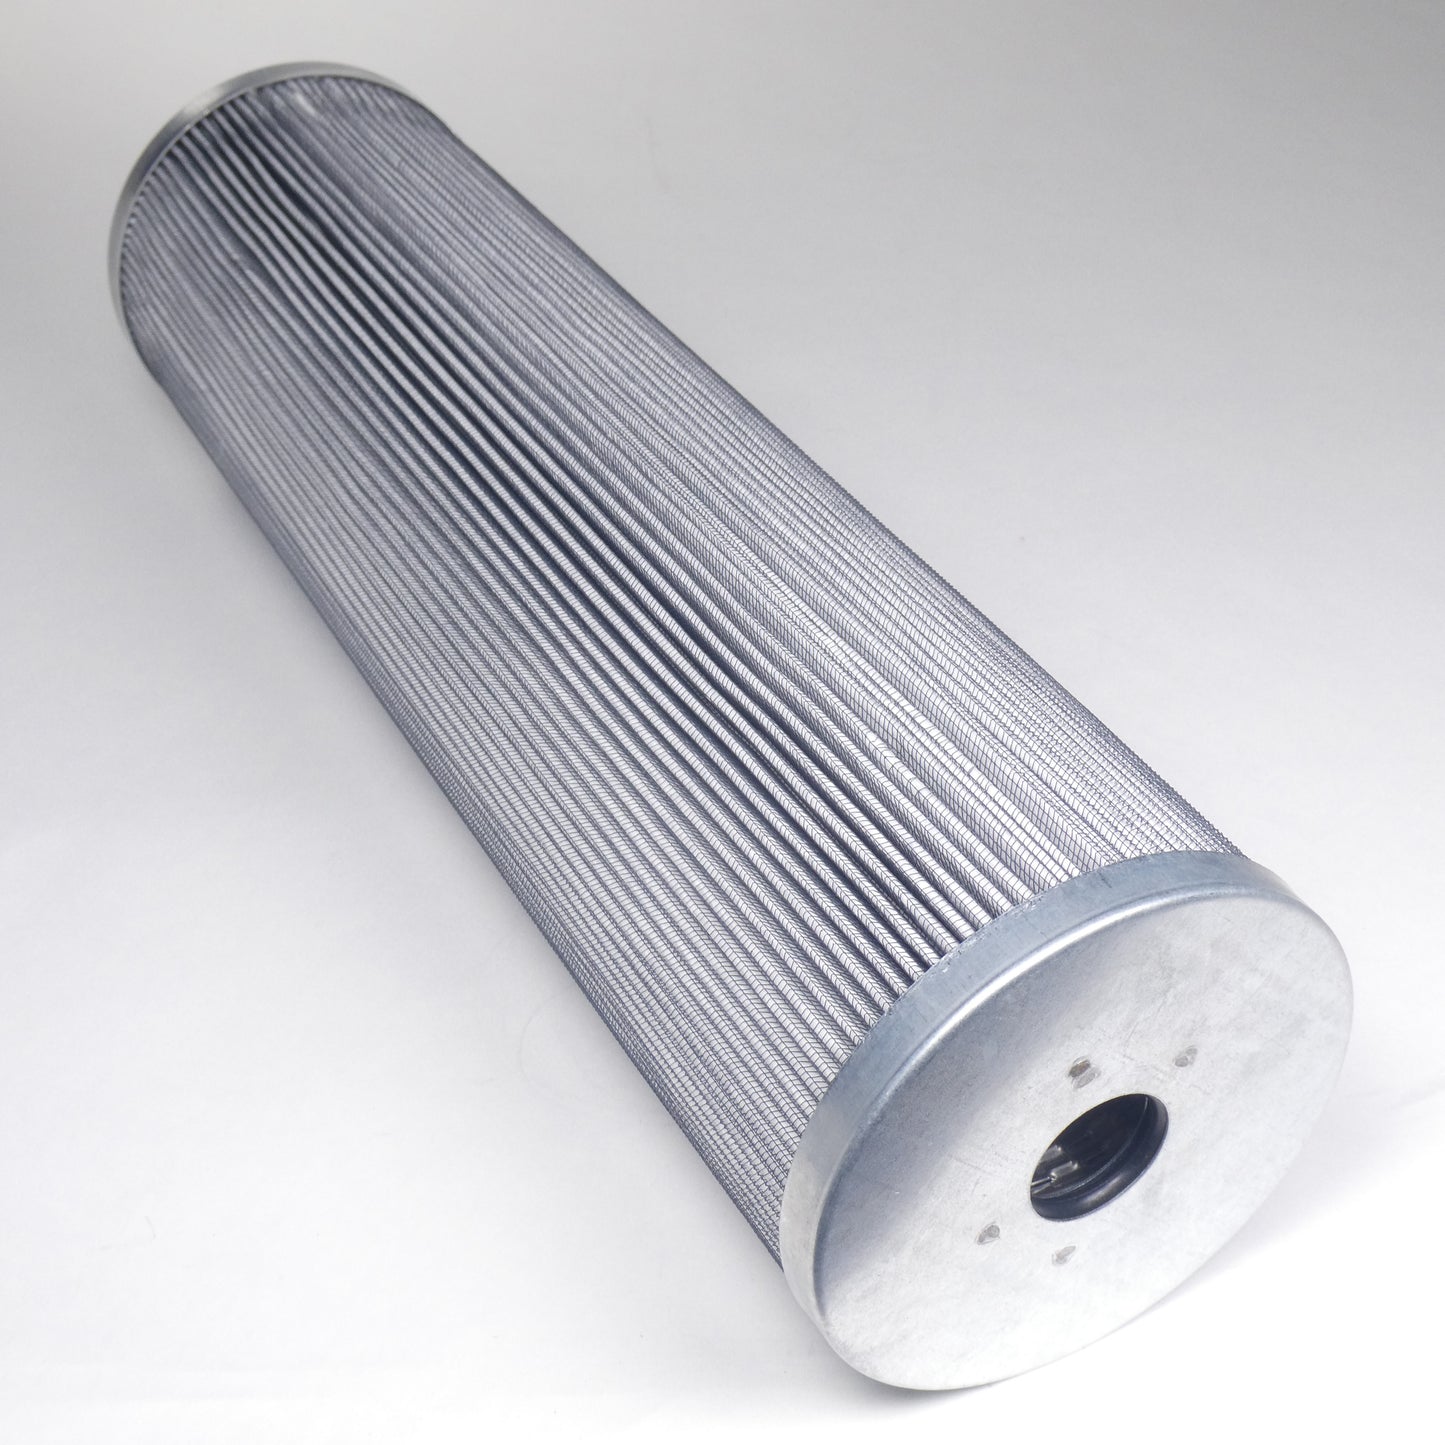 Hydrafil Replacement Filter Element for ISOPur PMR-001